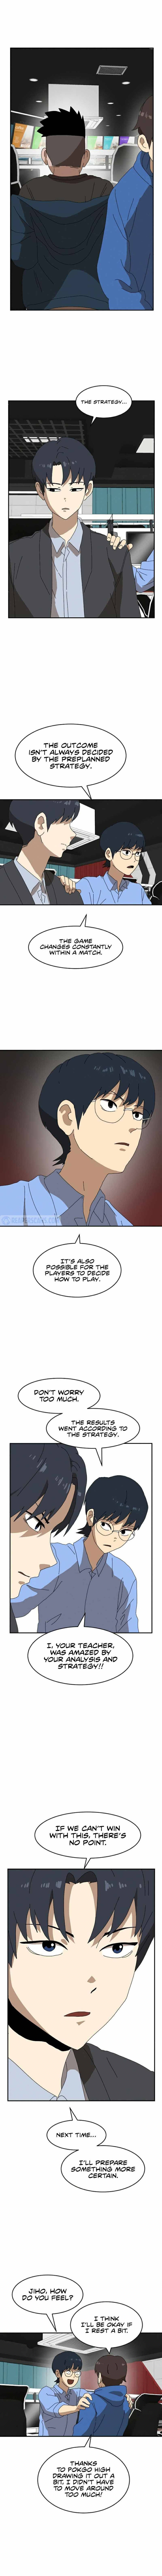 Double Click Chapter 19 page 2